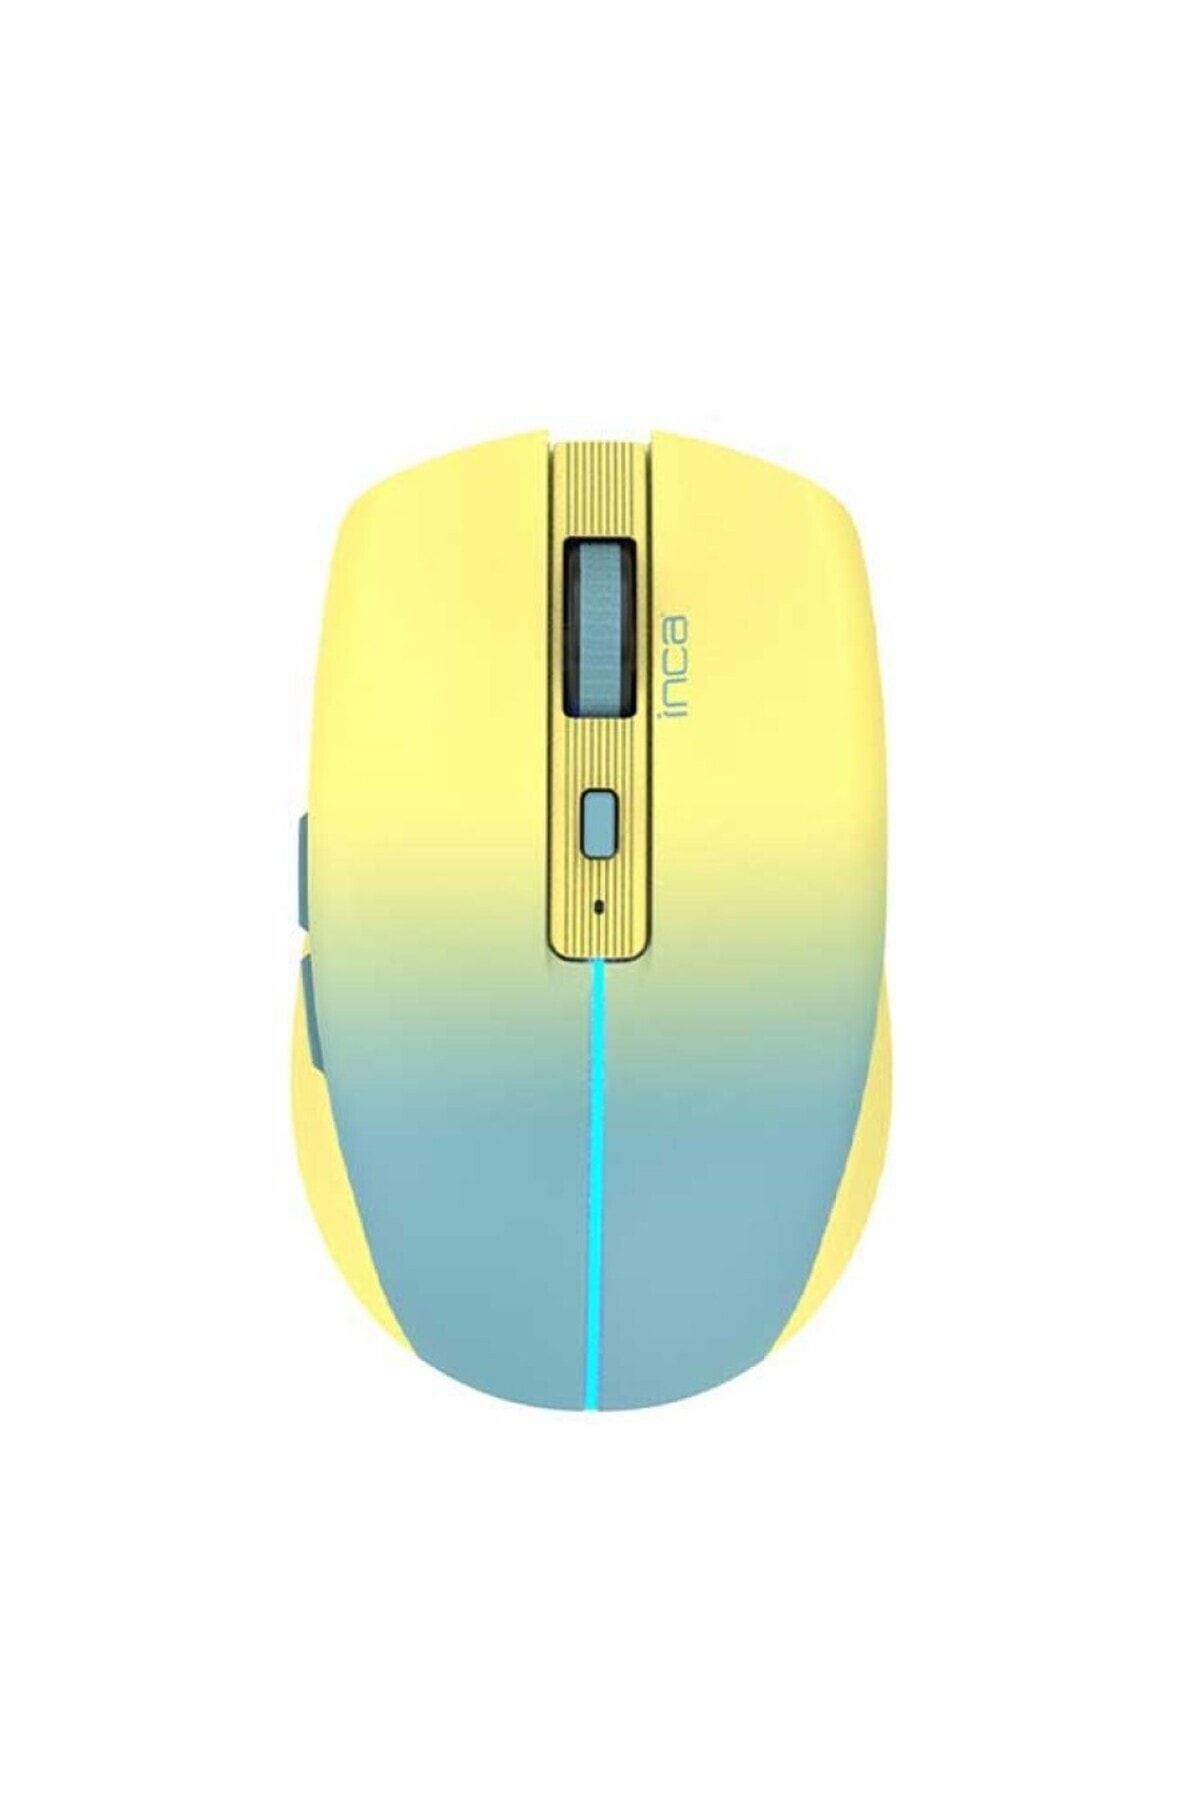 Inca IWM-511RS Dual Mod Bluetooth+Wireless Rechargeable Gradient Color Silent Mouse